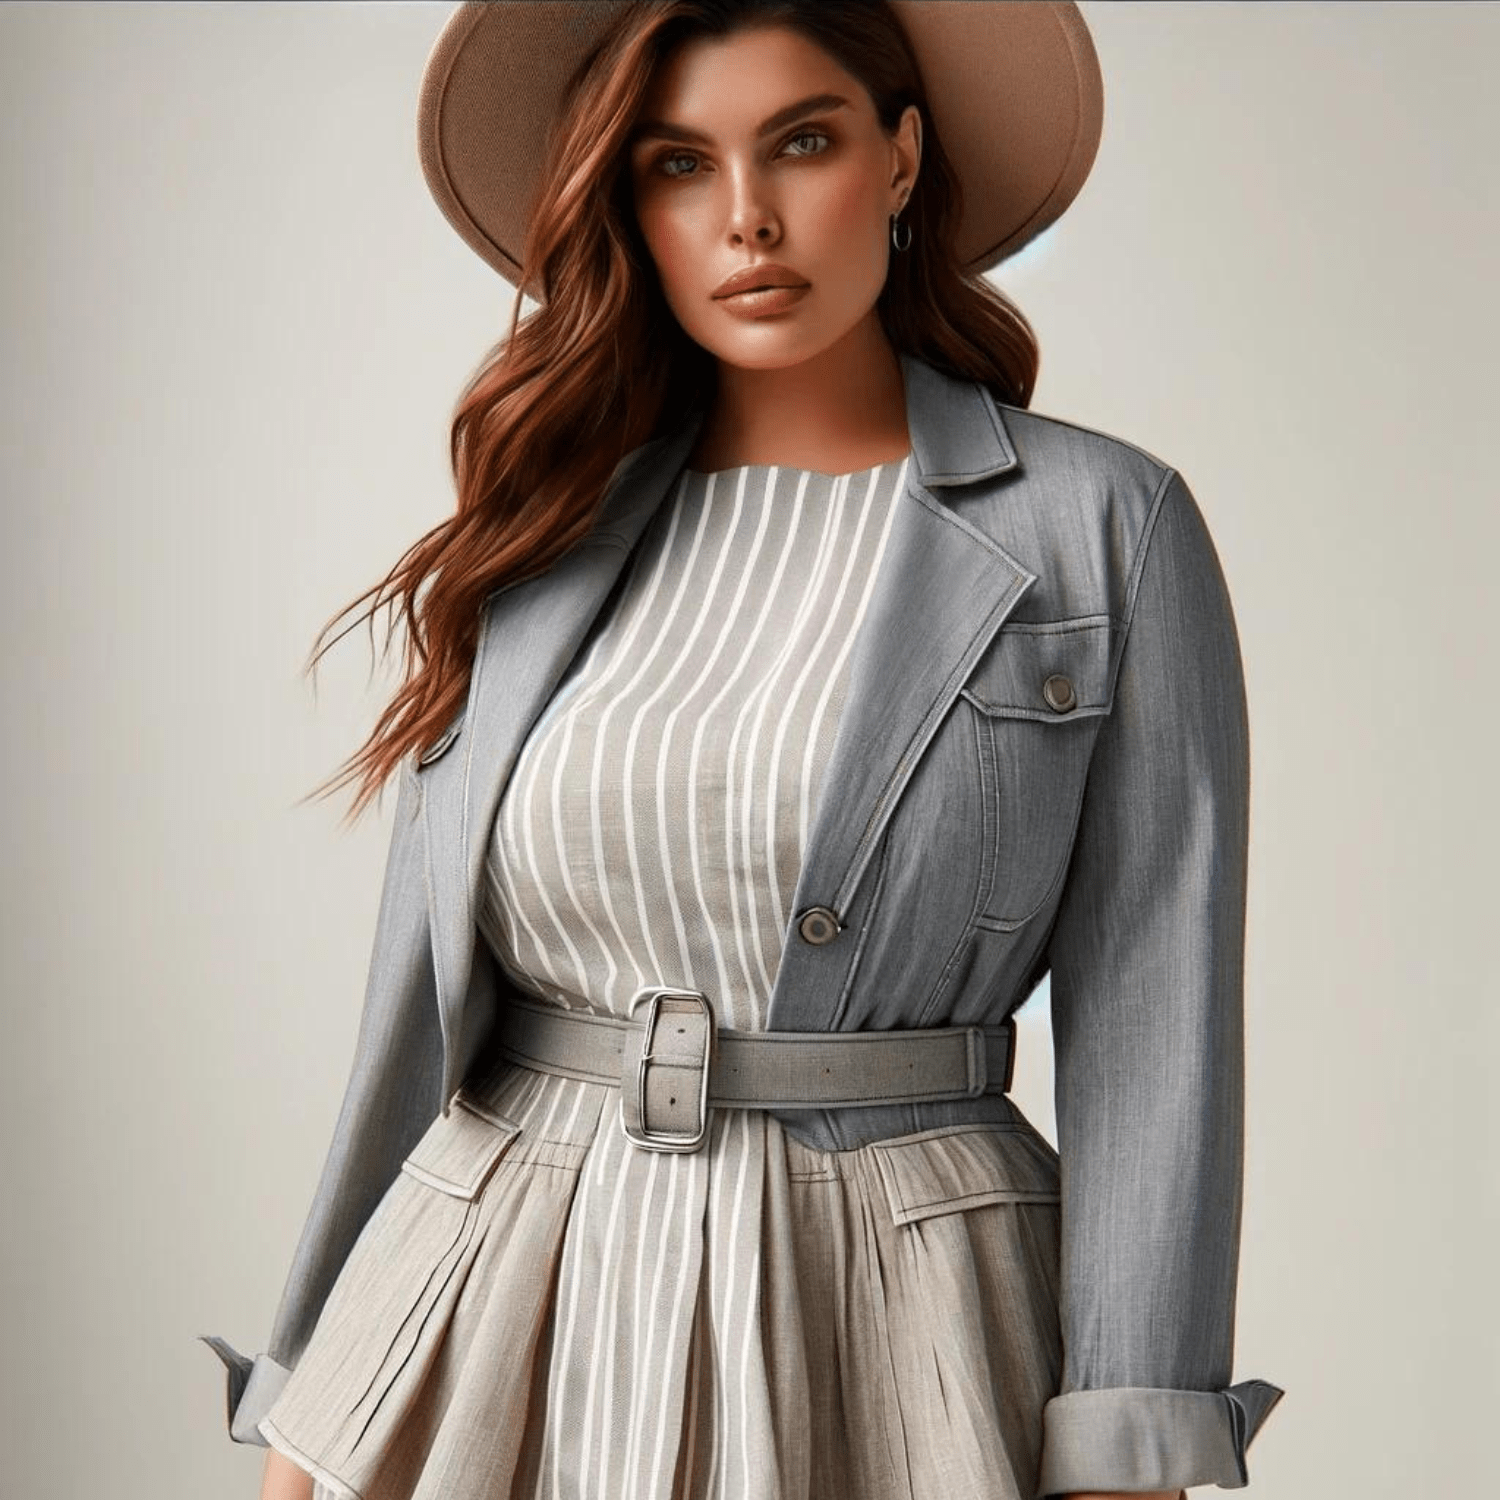 Plus Size Spring Outfits For Women Who Embrace Their Curves!